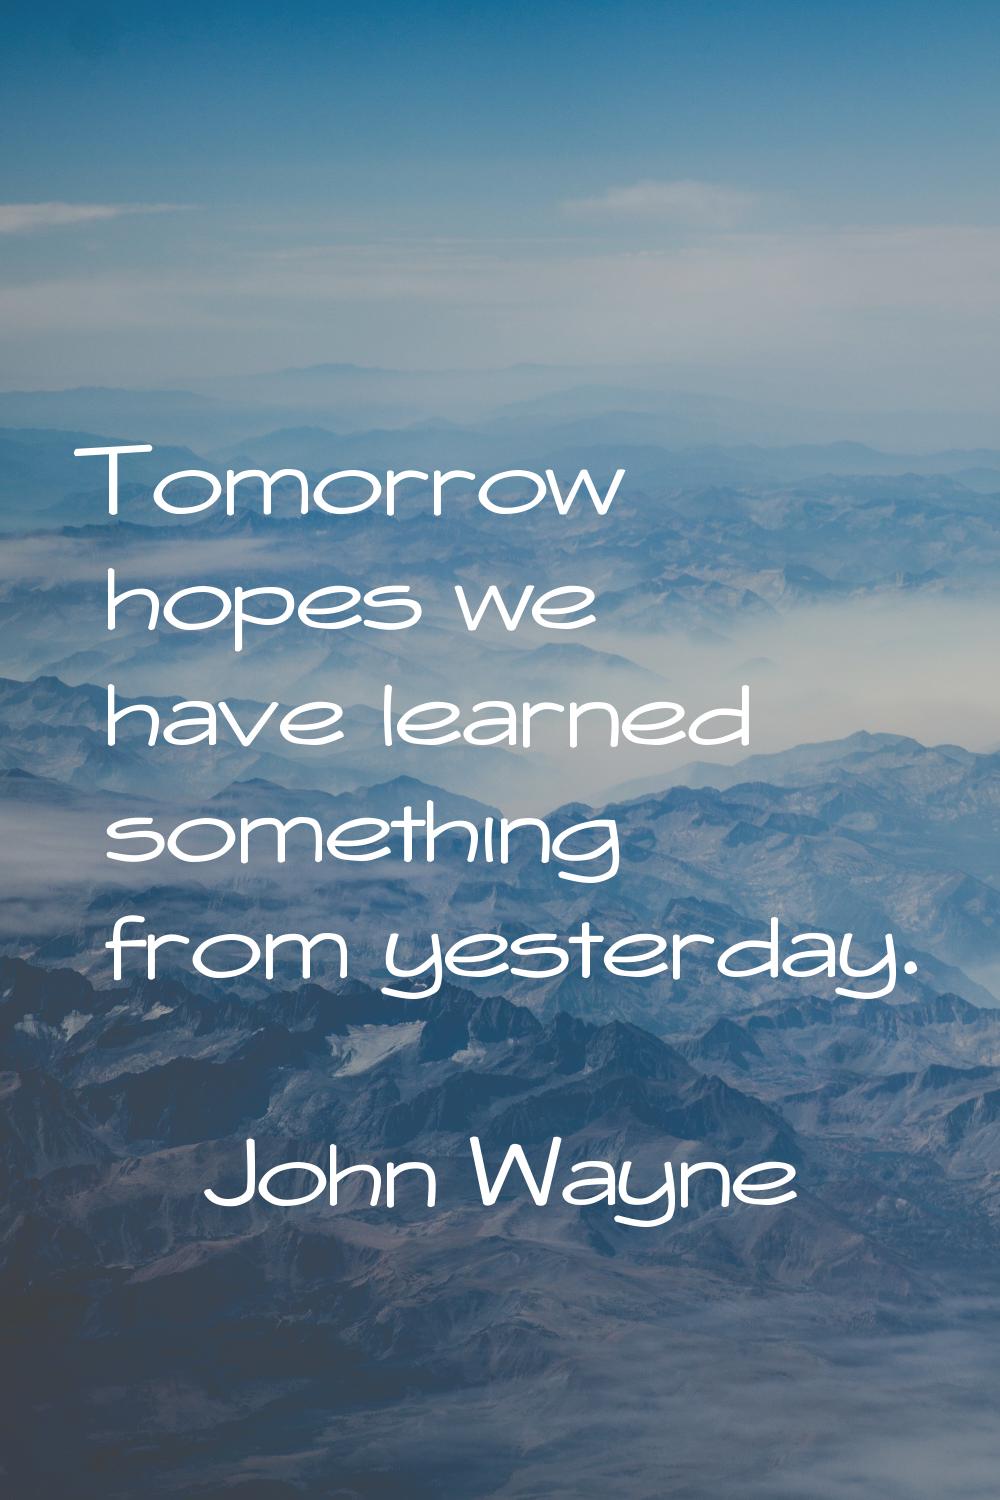 Tomorrow hopes we have learned something from yesterday.